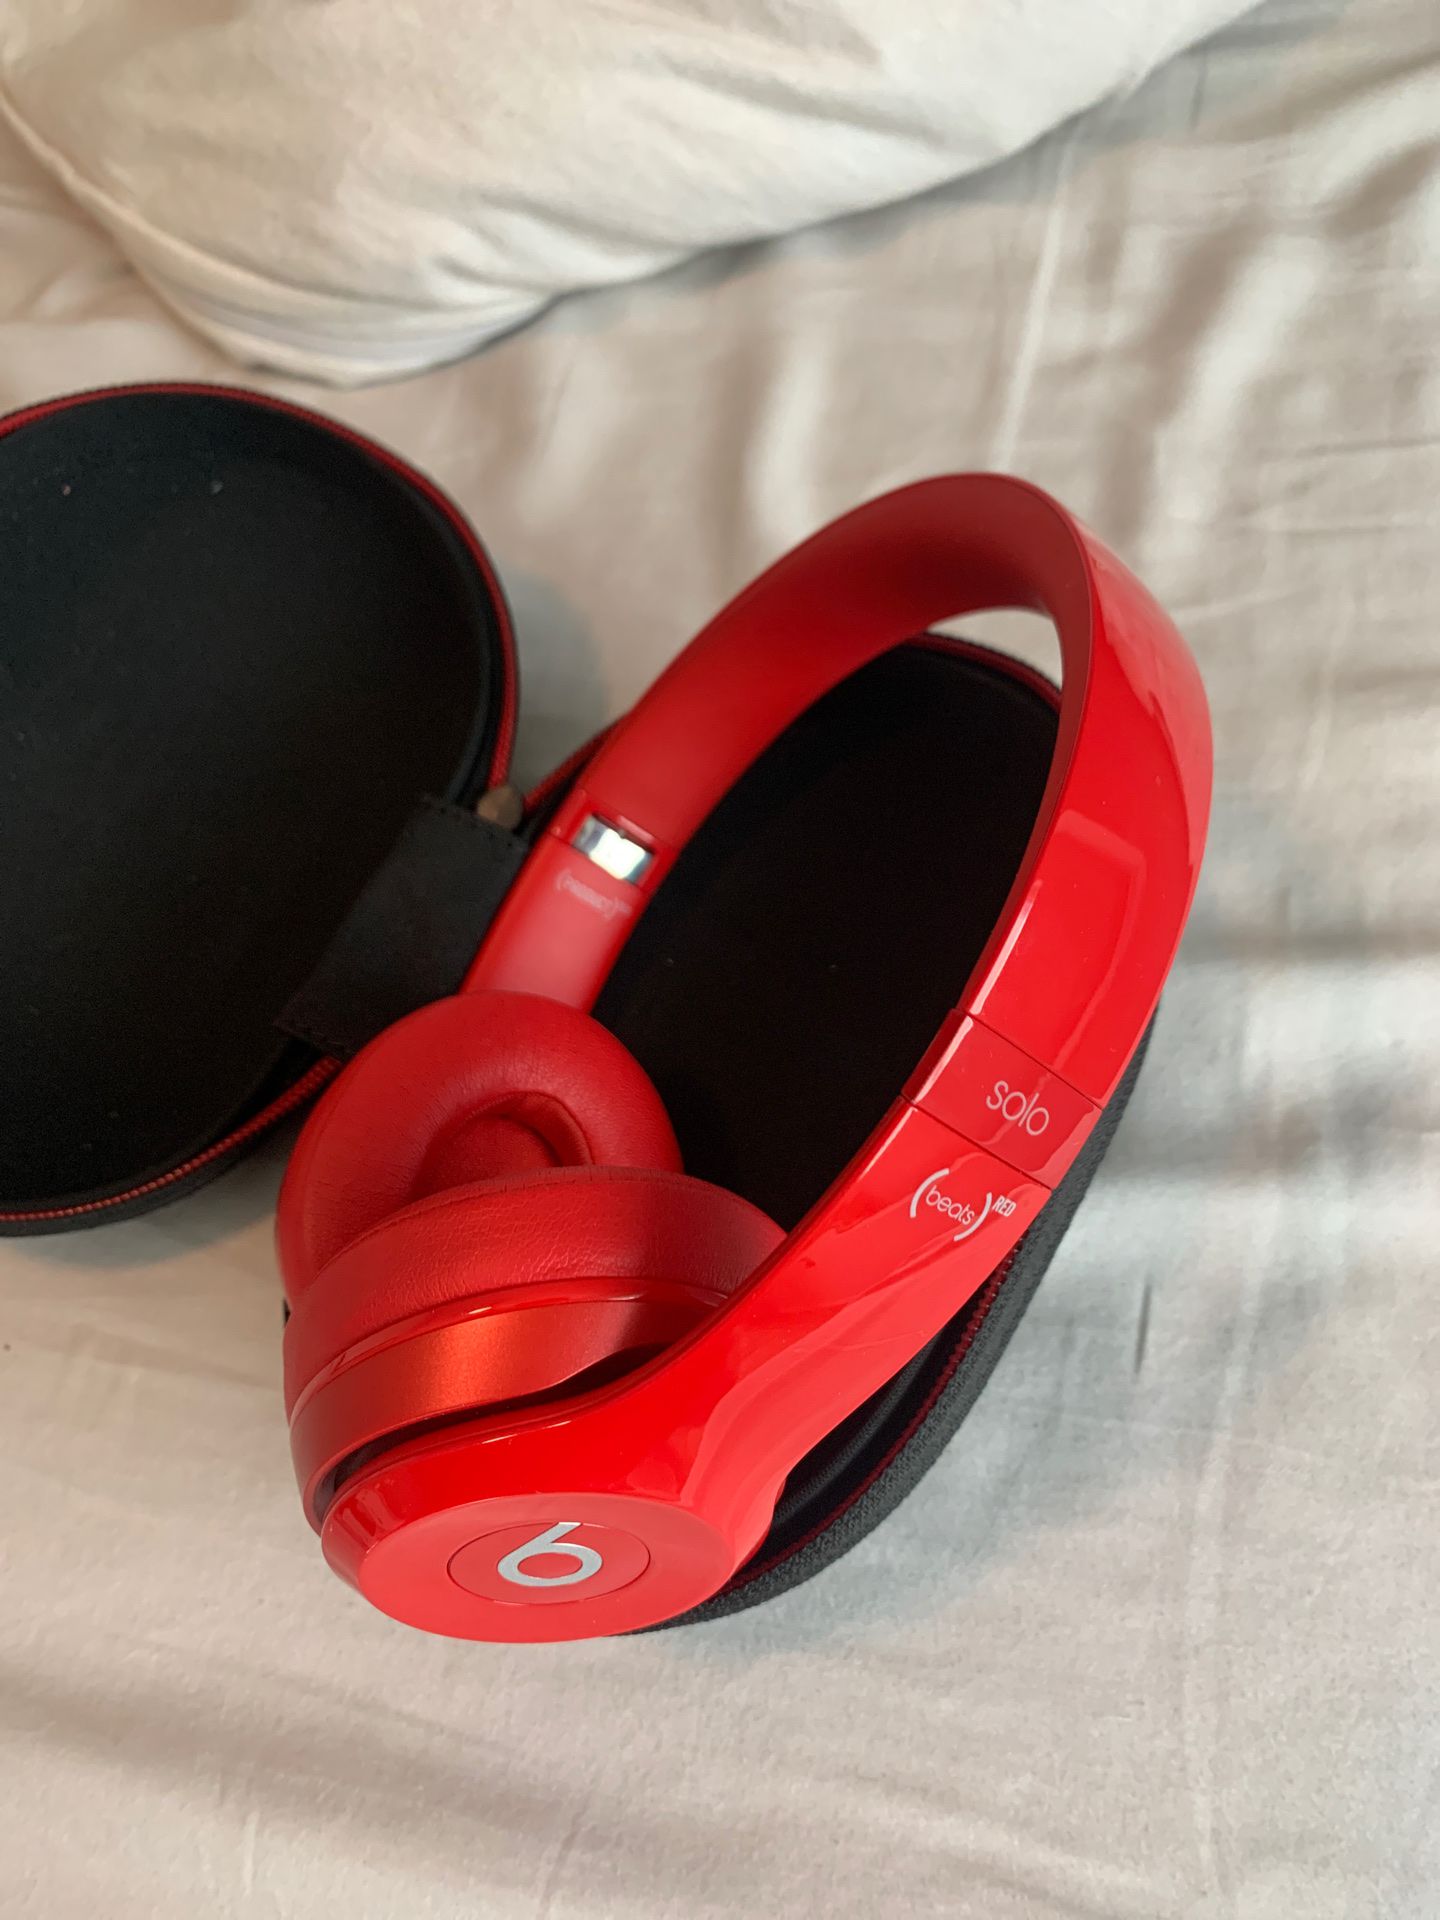 Beats Solo (Red)